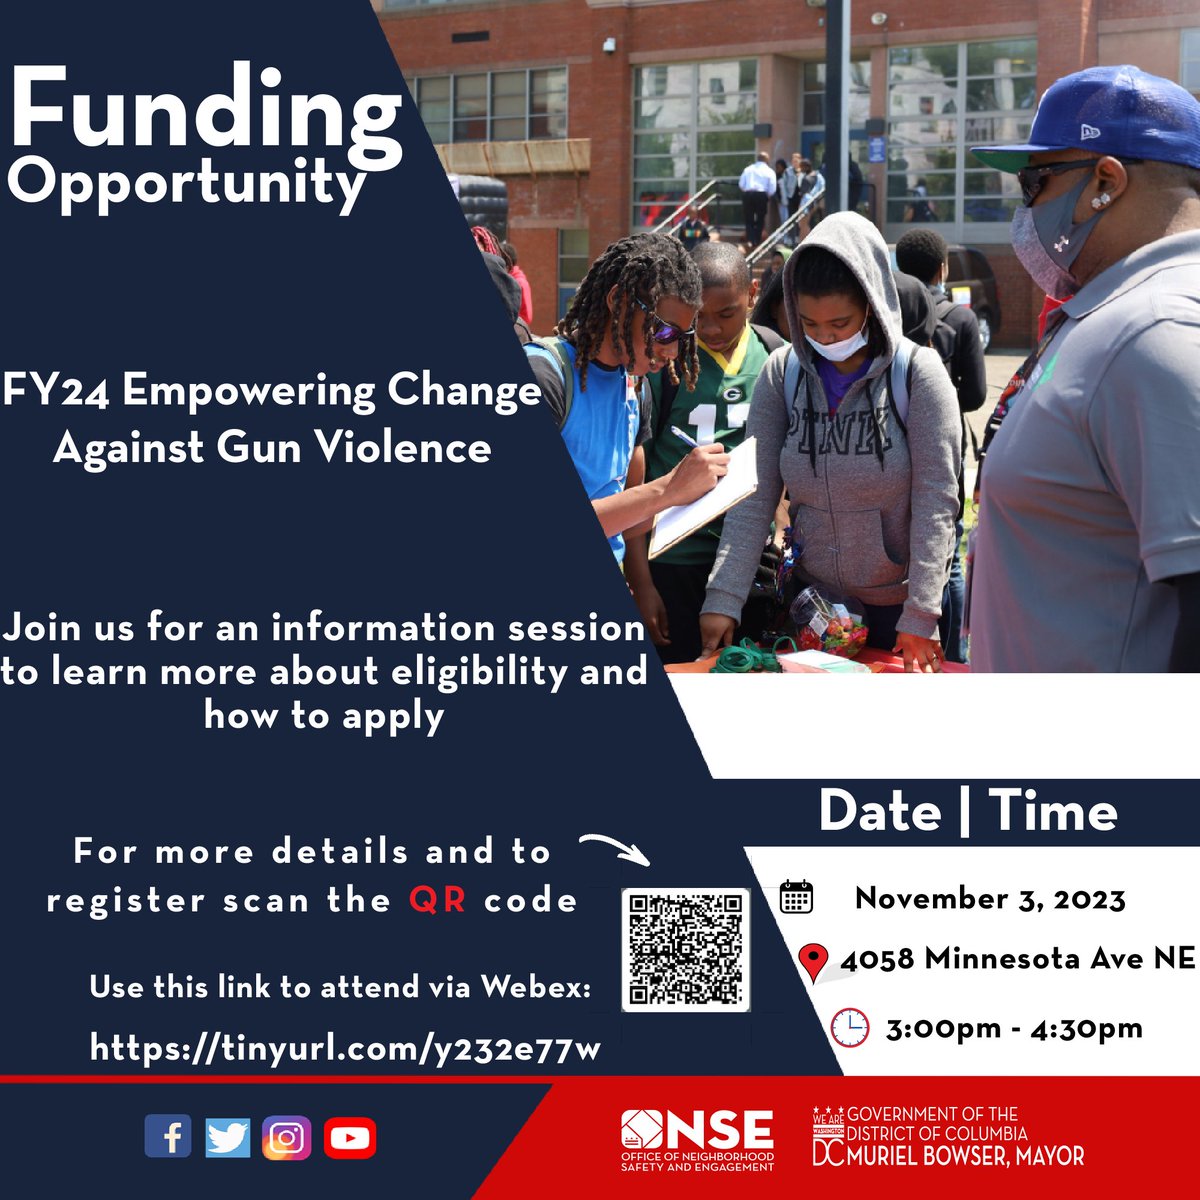 Hey there!📢Don't miss out on this opportunity to help reduce gun violence and increase safety. Register and join us 11/03 👇to learn about eligibility and how to apply for this public safety grant.